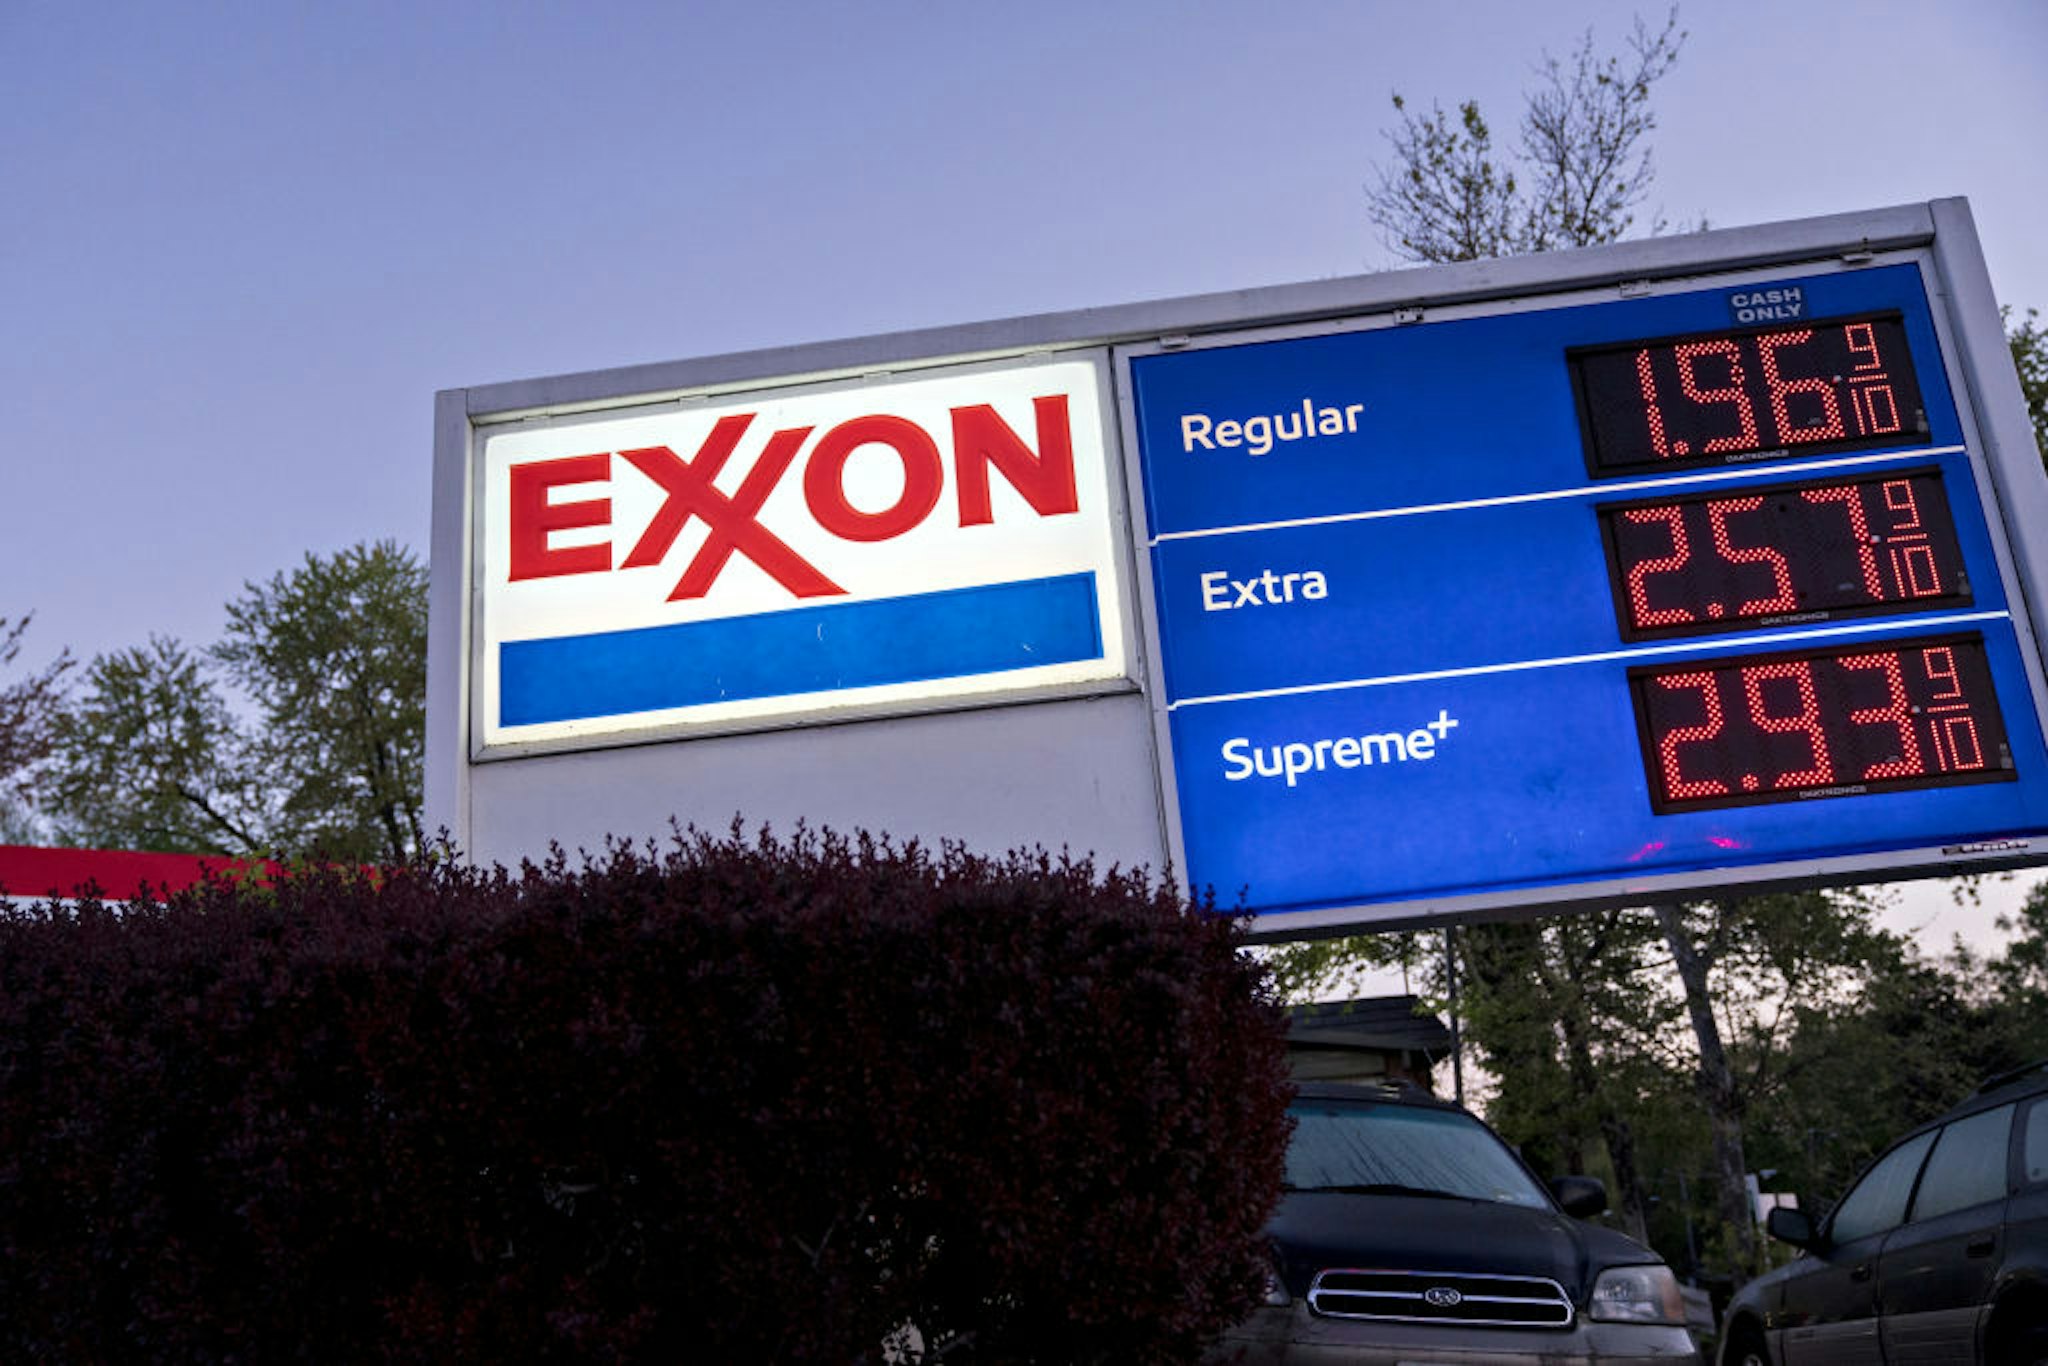 Fuel prices are displayed at an Exxon Mobil Corp. gas station in Arlington, Virginia, U.S., on Wednesday, April 29, 2020. Exxon is scheduled to released earnings figures on May 1. Photographer: Andrew Harrer/Bloomberg via Getty Images